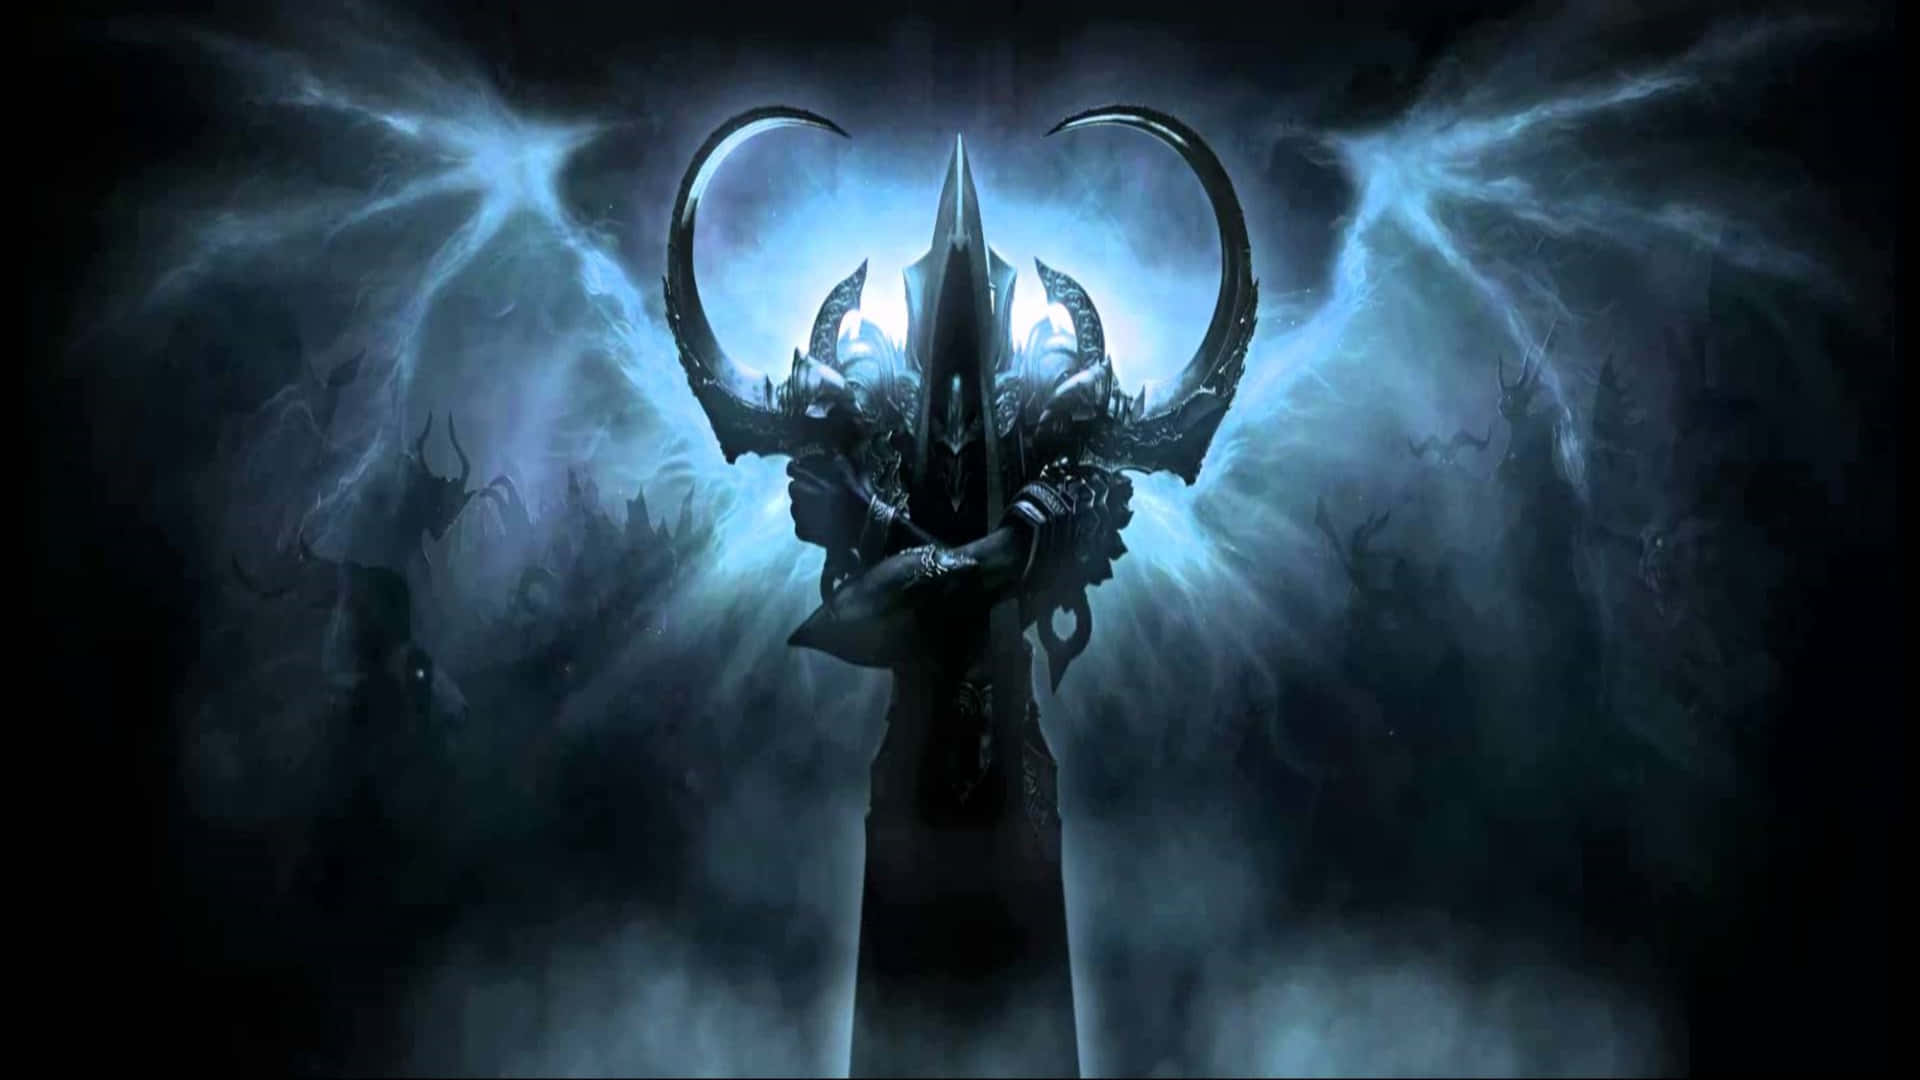 A Dark Image Of A Demon With Horns Wallpaper